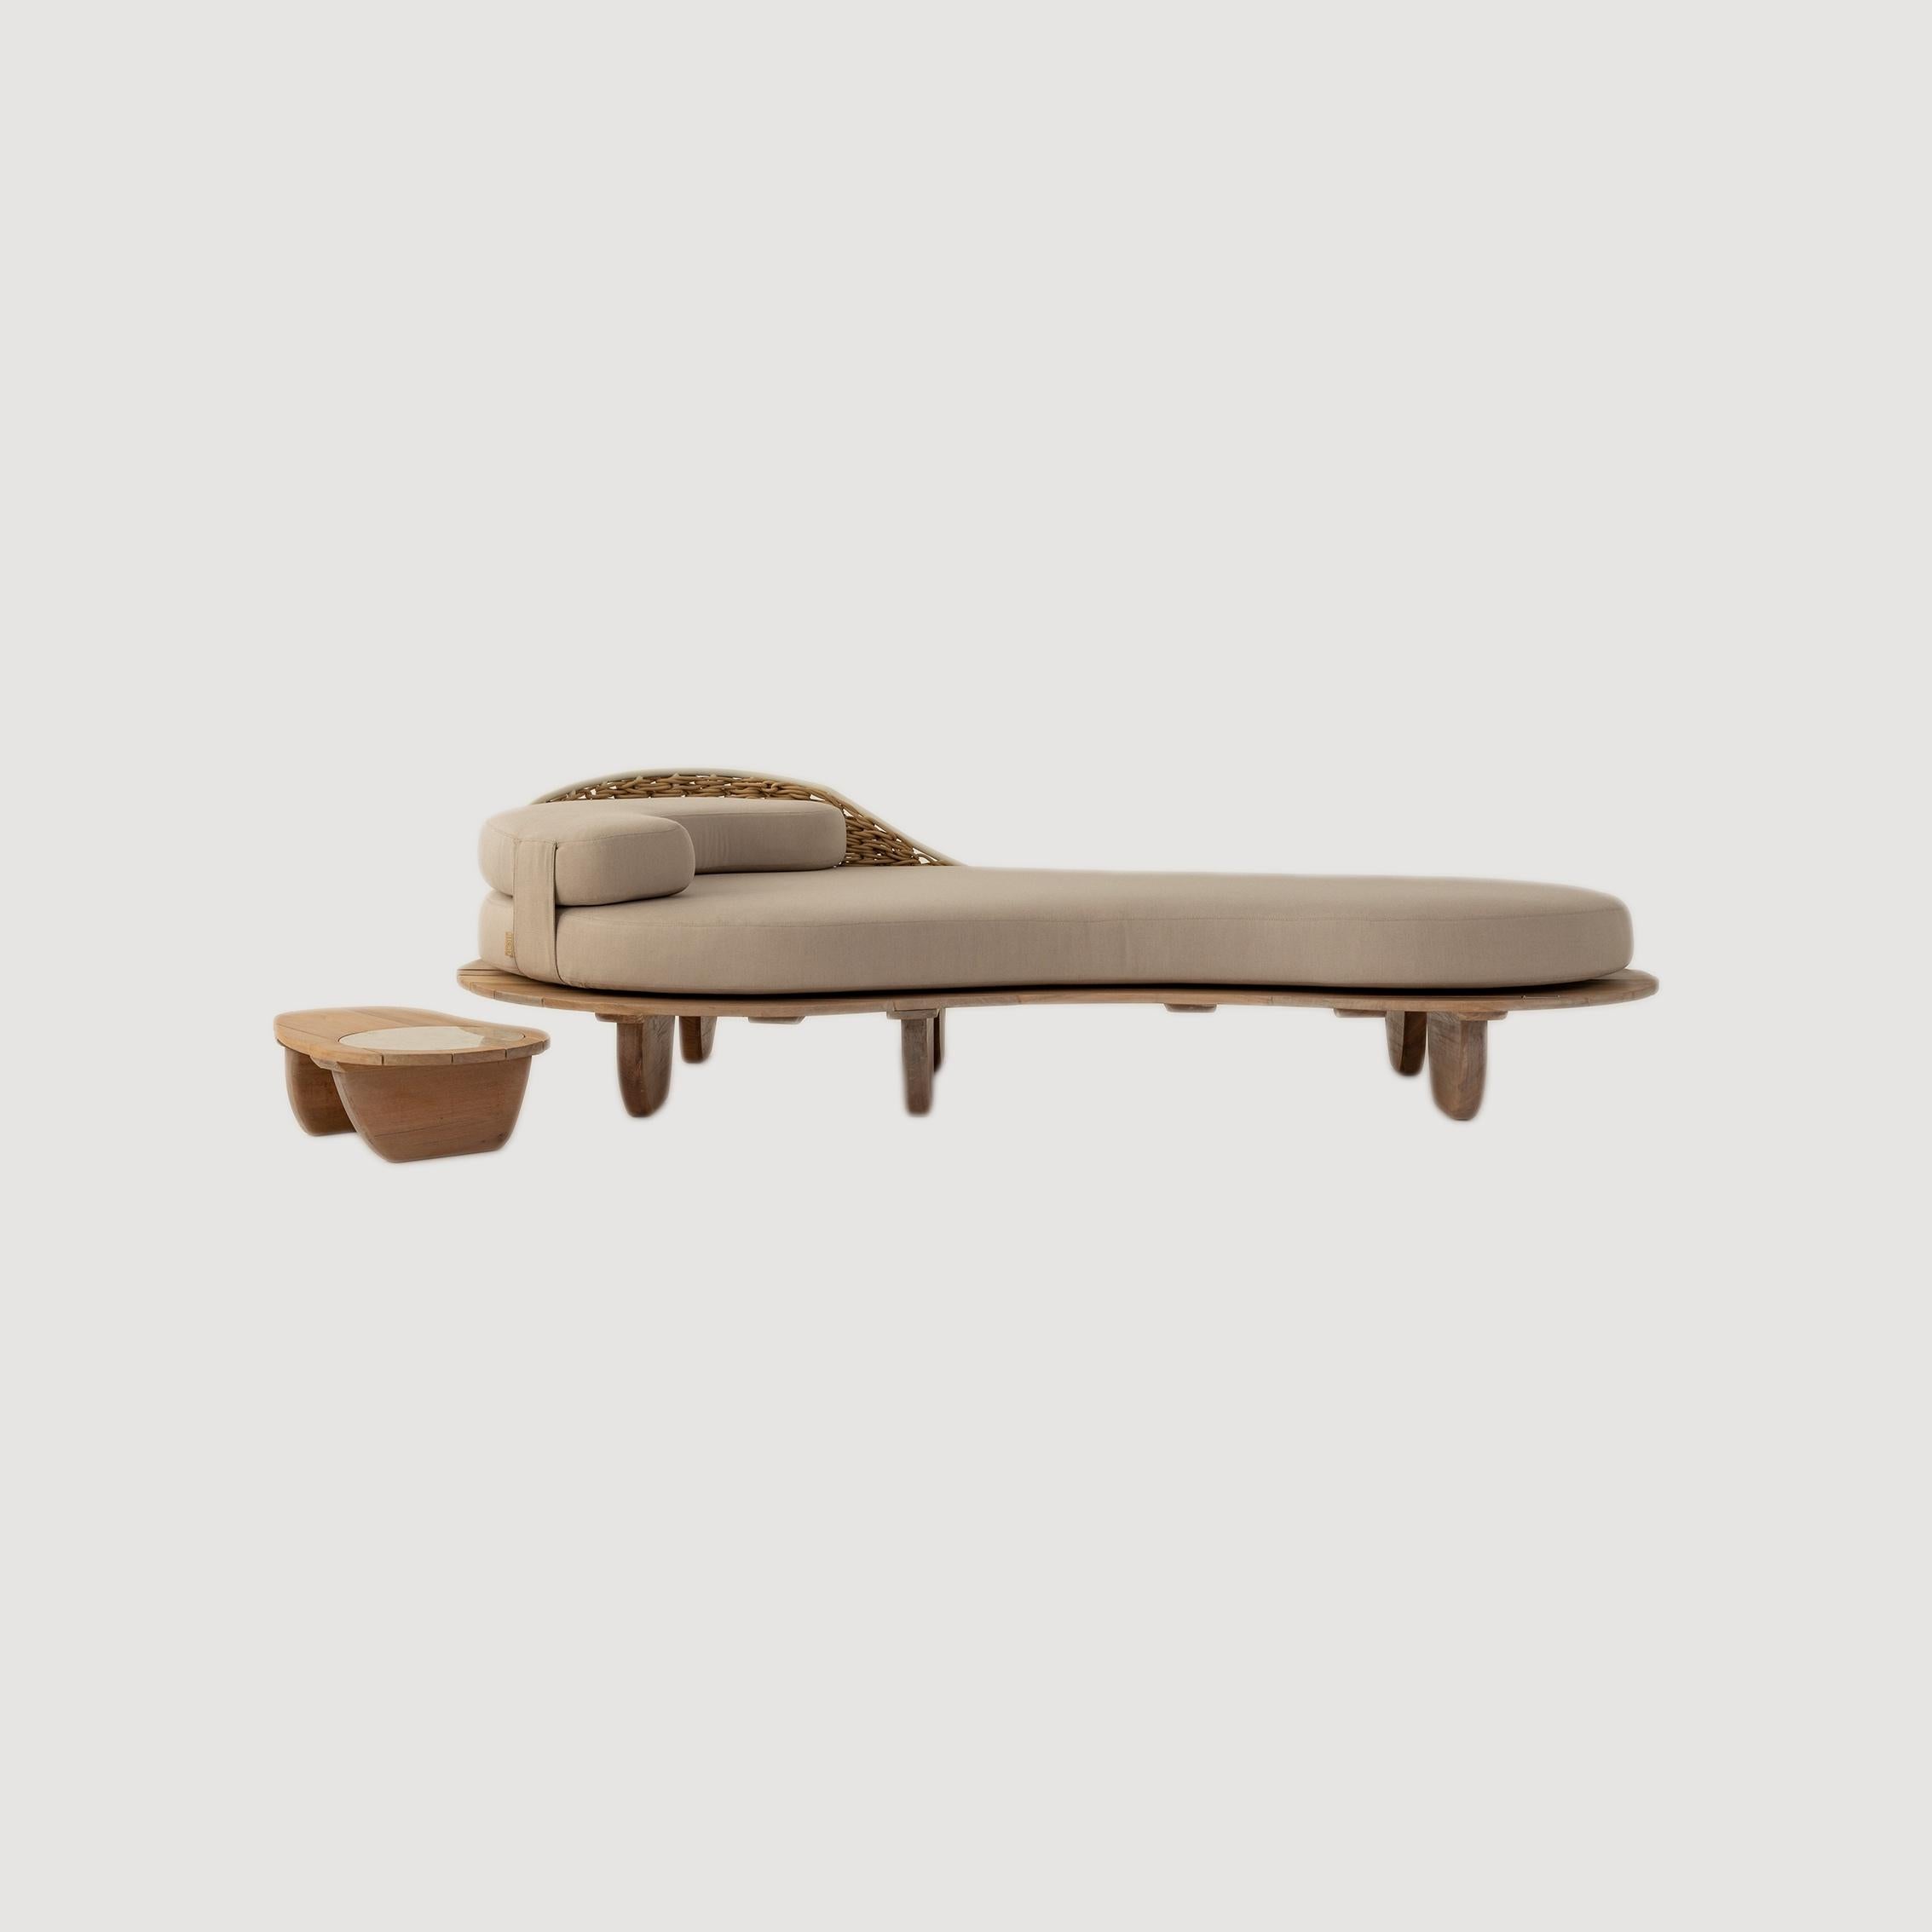 The Sayari Indoor / Outdoor Daybed Chaise and Table Collection by Studio Lloyd For Sale 3